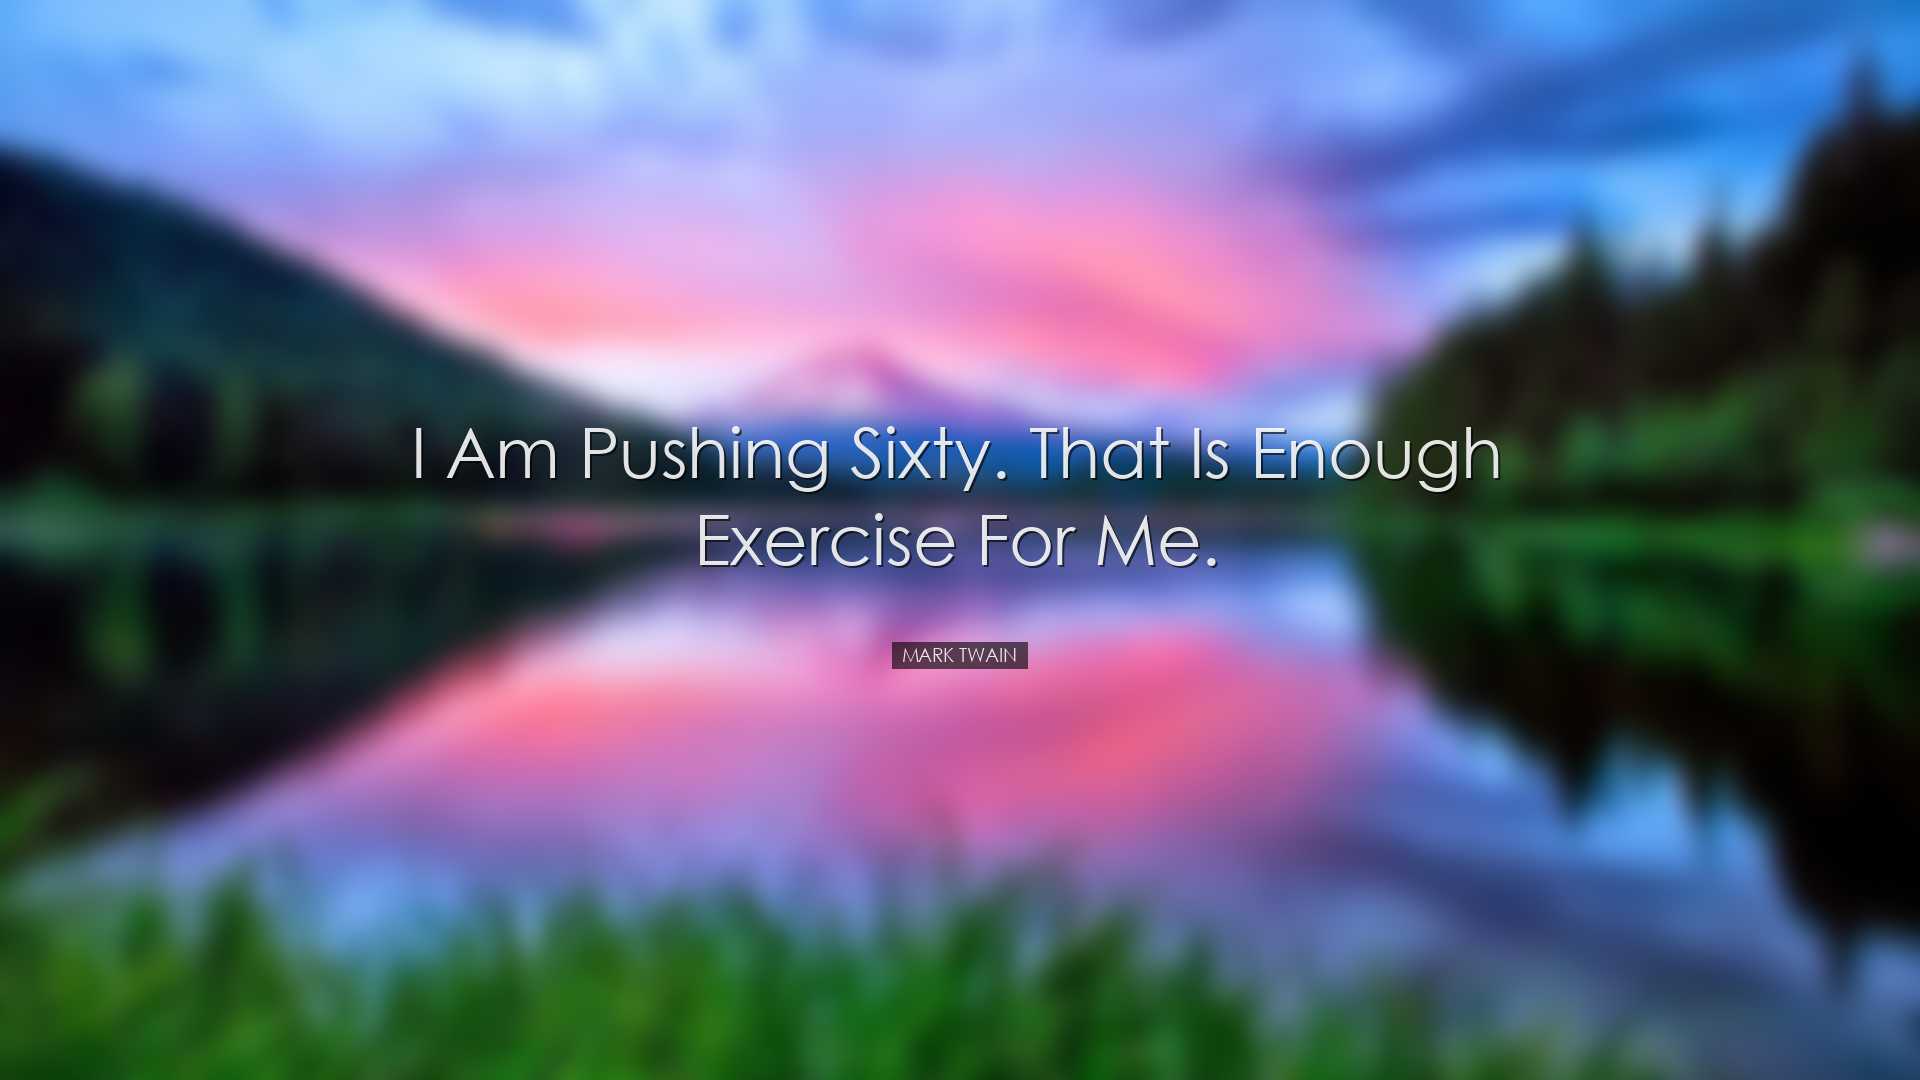 I am pushing sixty. That is enough exercise for me. - Mark Twain